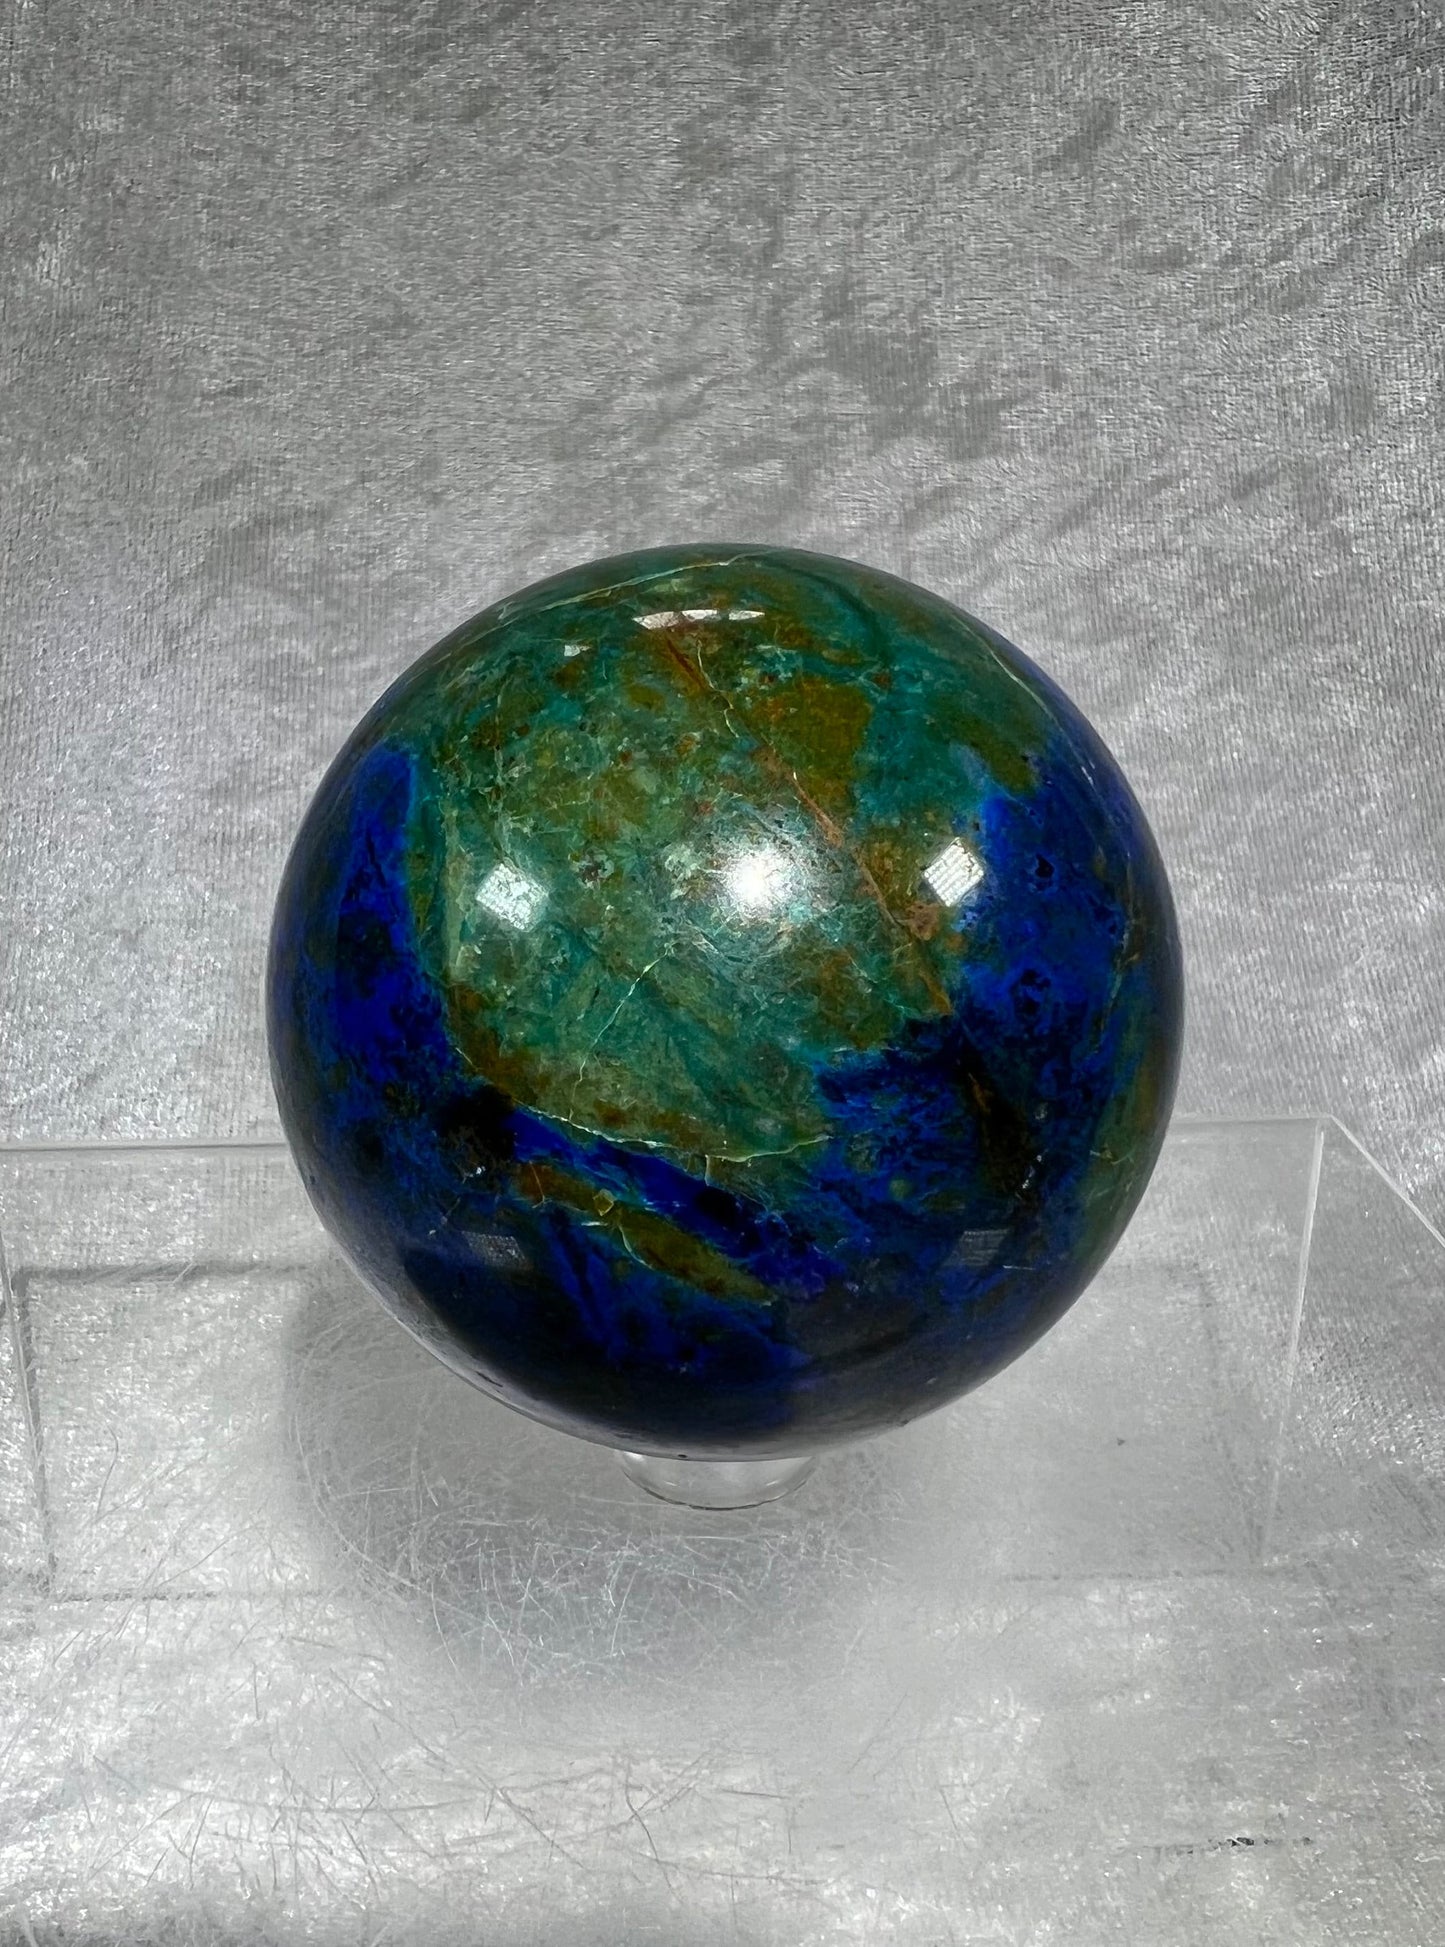 Amazing Azurite and Malachite Crystal Sphere. 64mm. Incredible Deep Colors And Patterns. Awesome Collectors Piece!